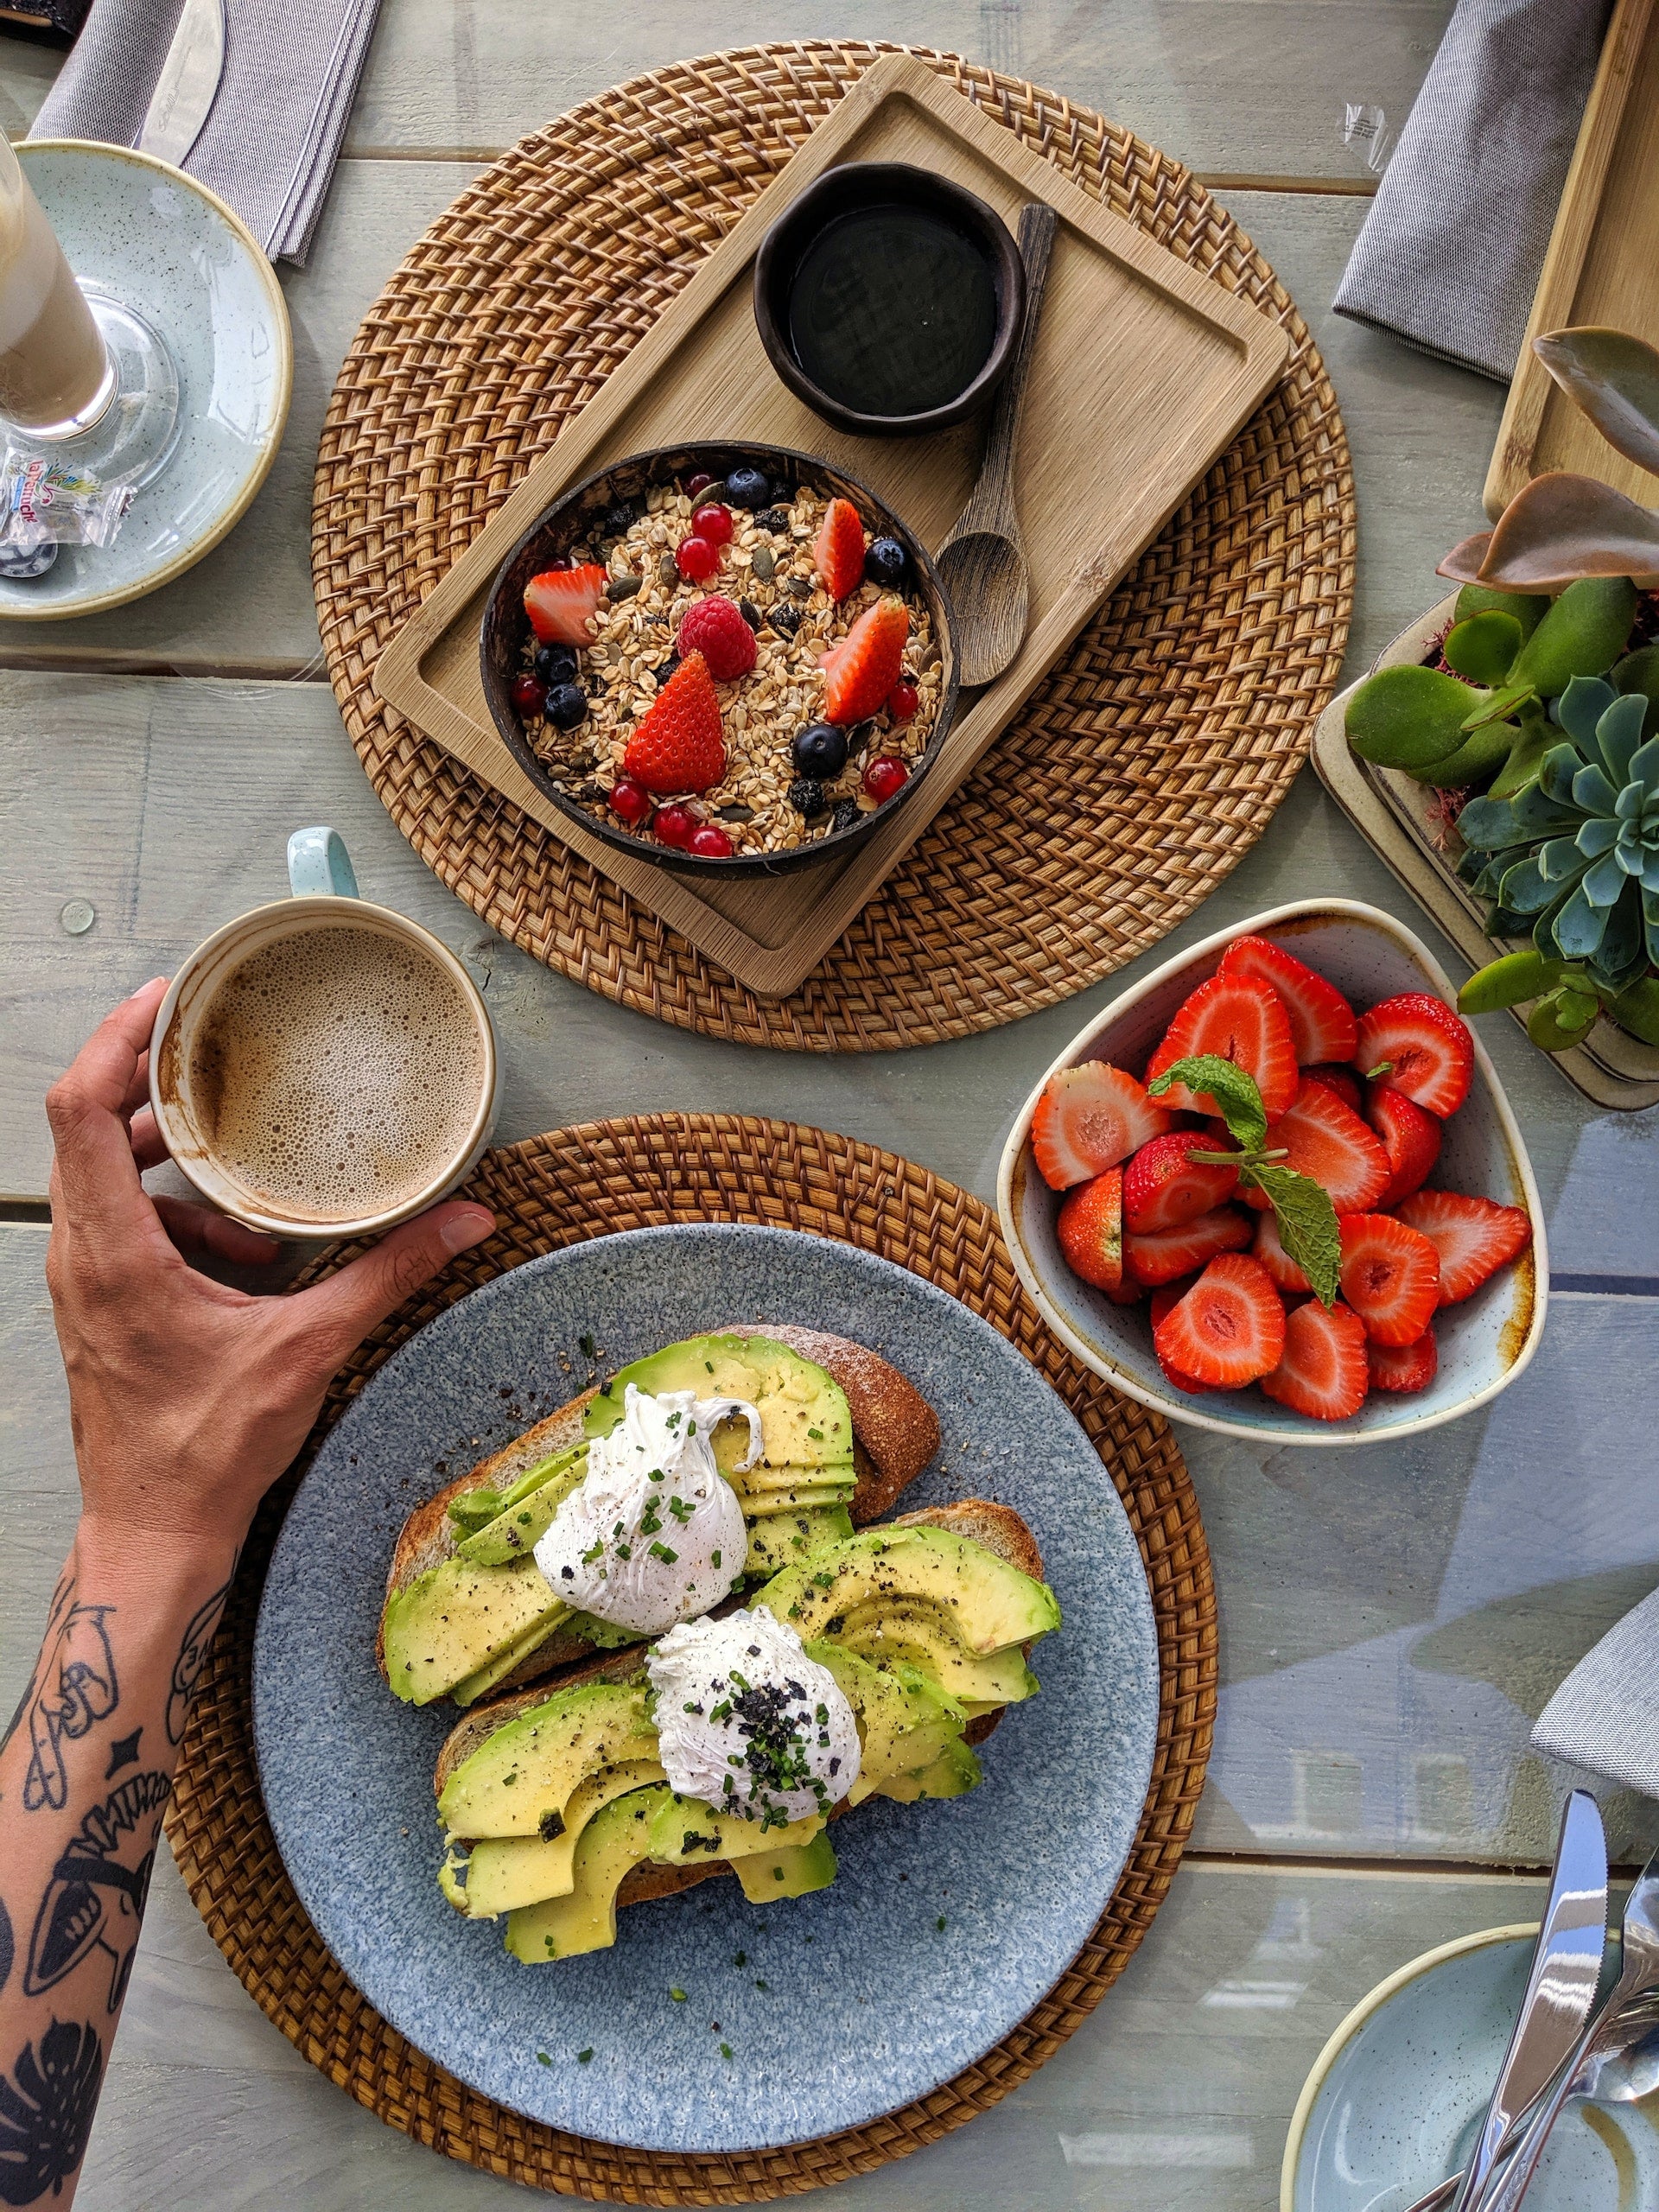 An aerial image of a food spread including avocado toast, a bowl of berries, oatmeal with berries on top, and a cup of coffee